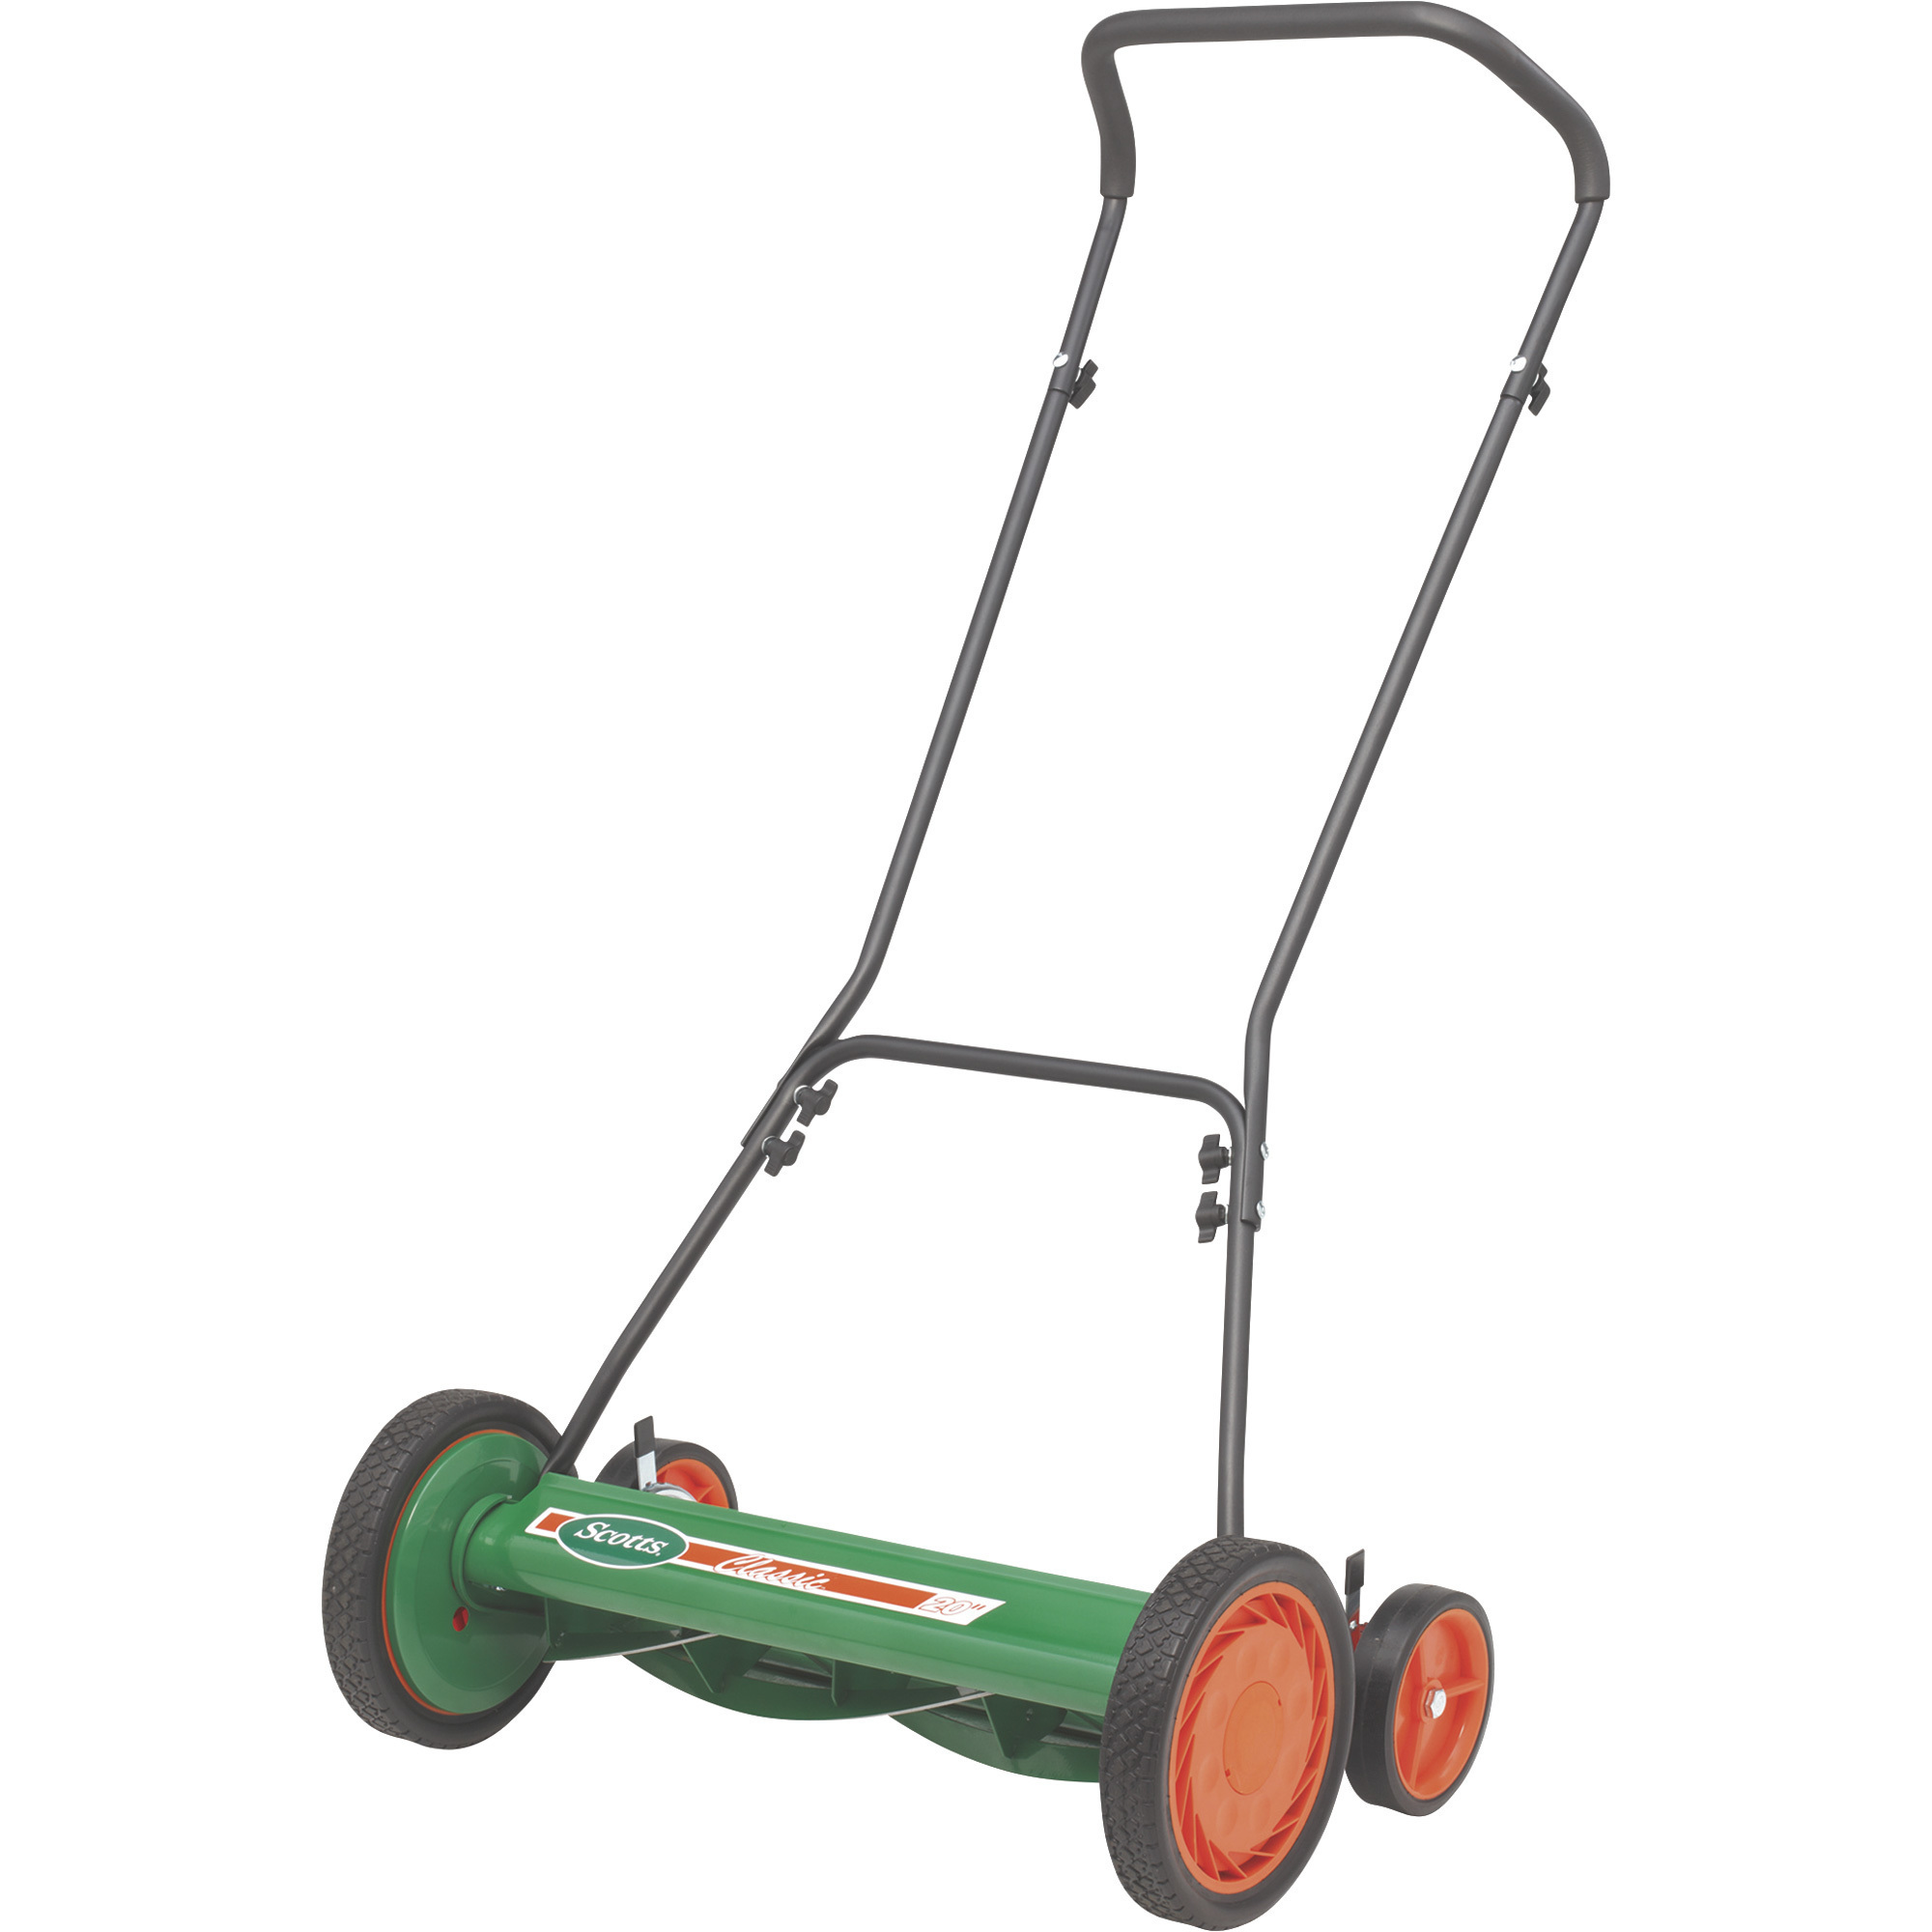 American Lawn Mower 14-Inch Reel Lawn Mower with 4-Blade Ball